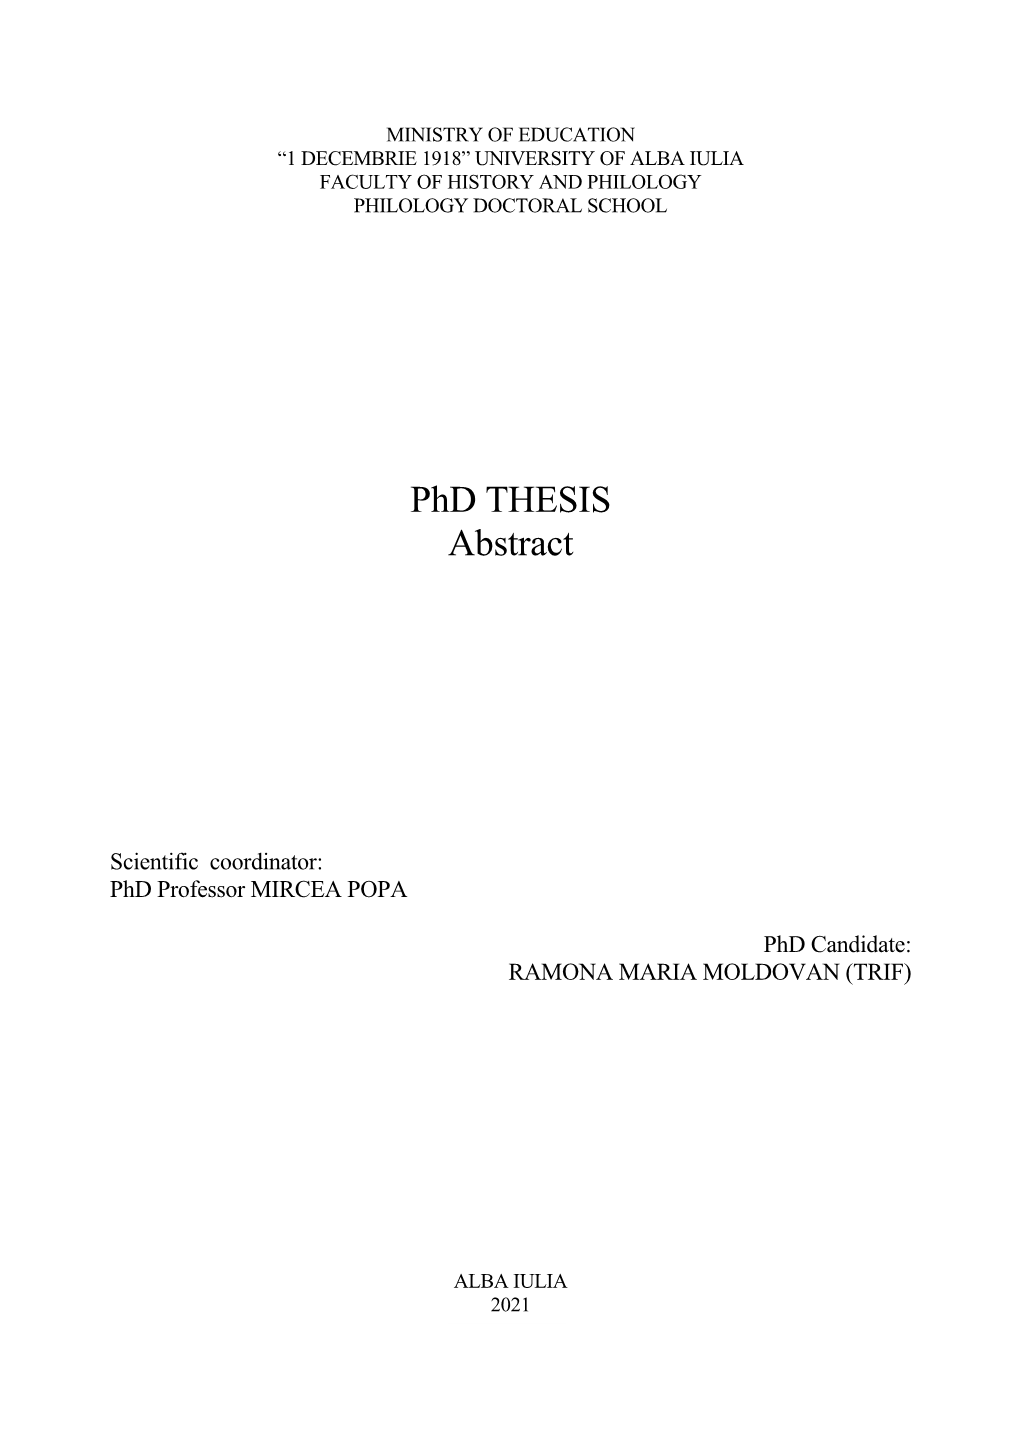 Phd THESIS Abstract